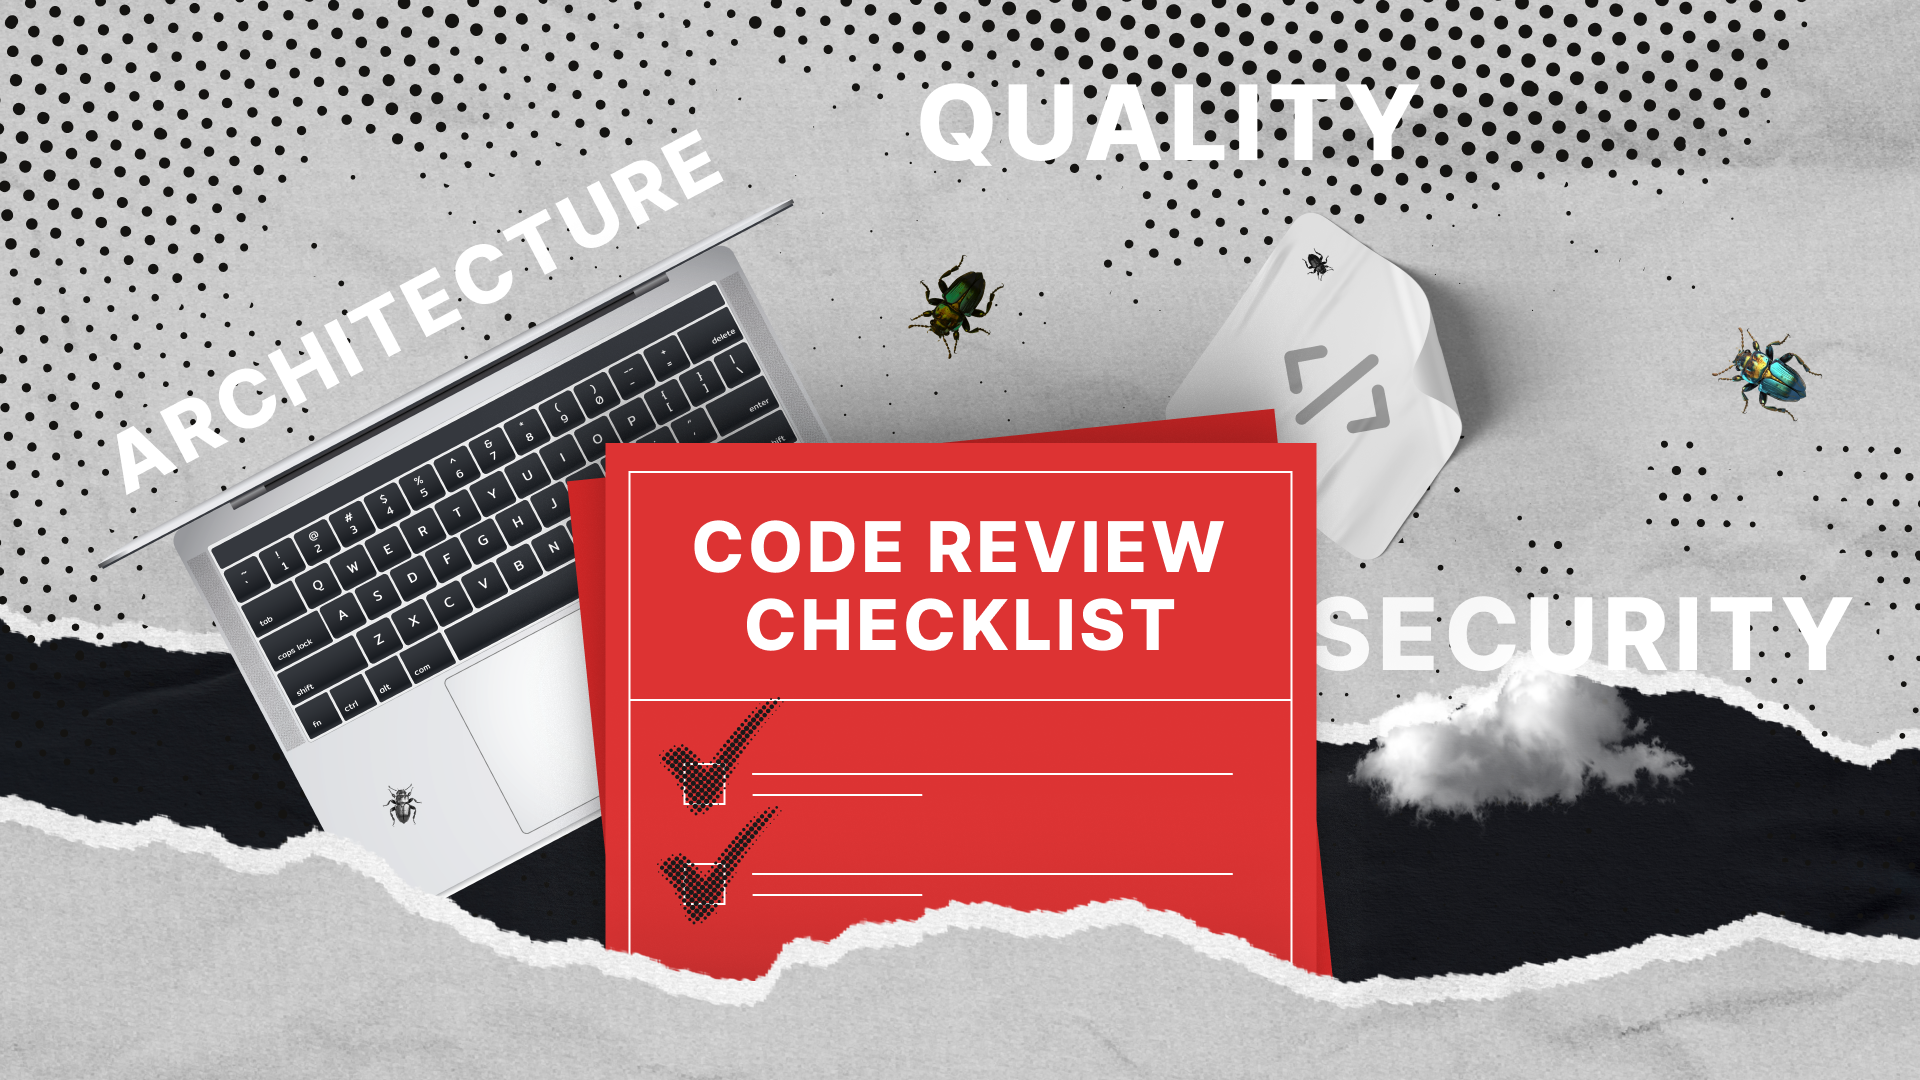 Code Review Checklist from Redwerk – All Steps Included